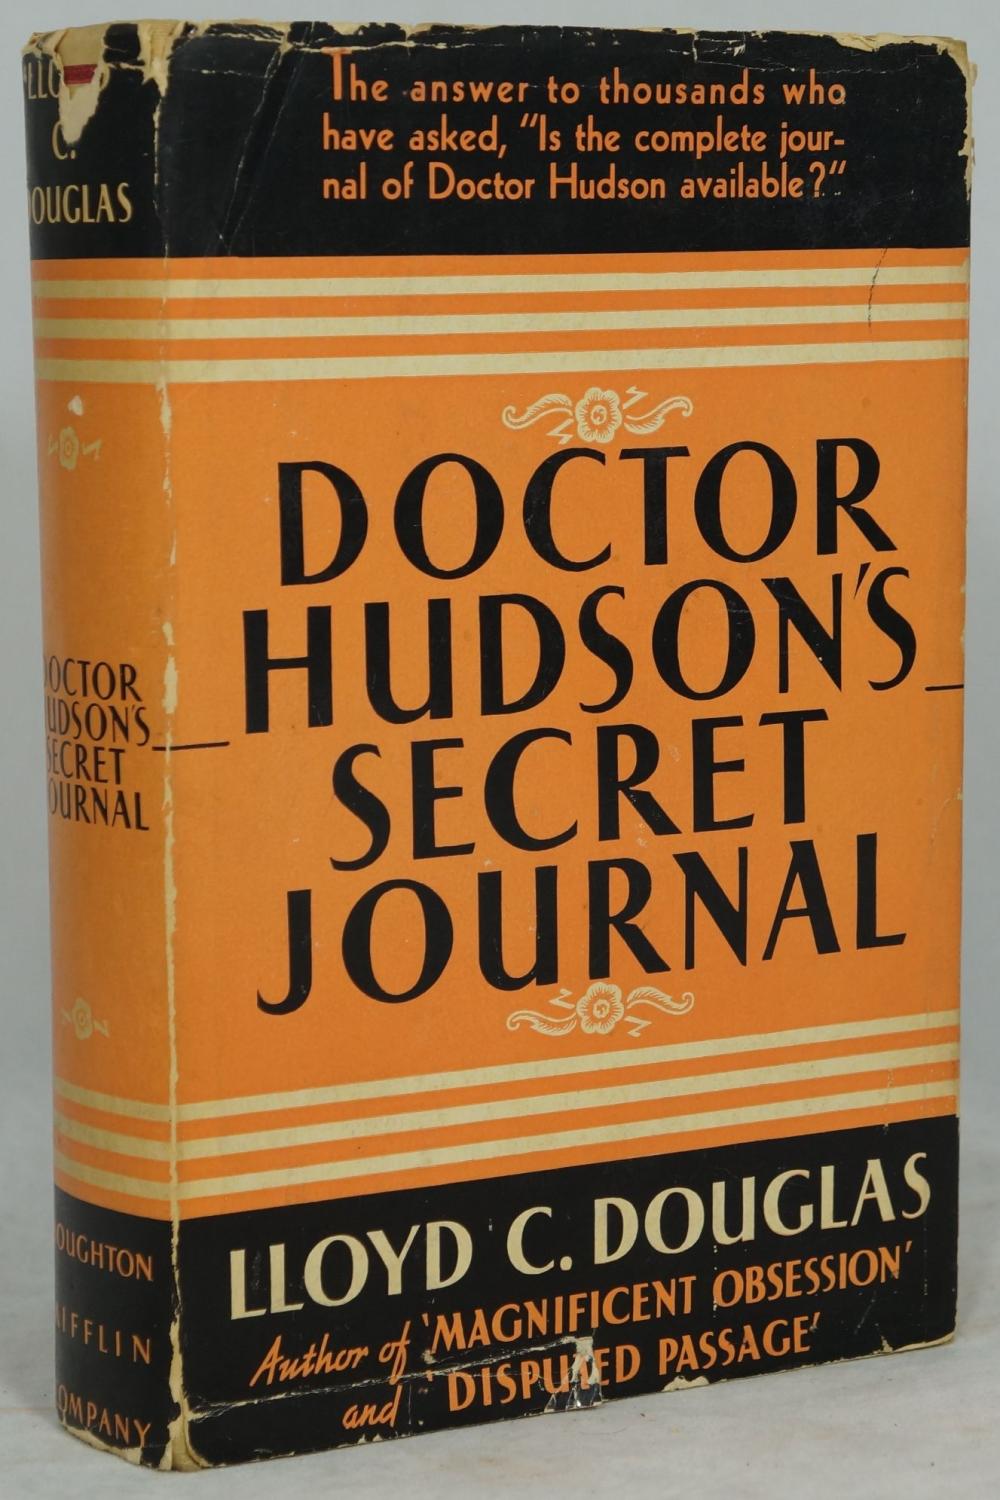 how to study doctor hudson's research